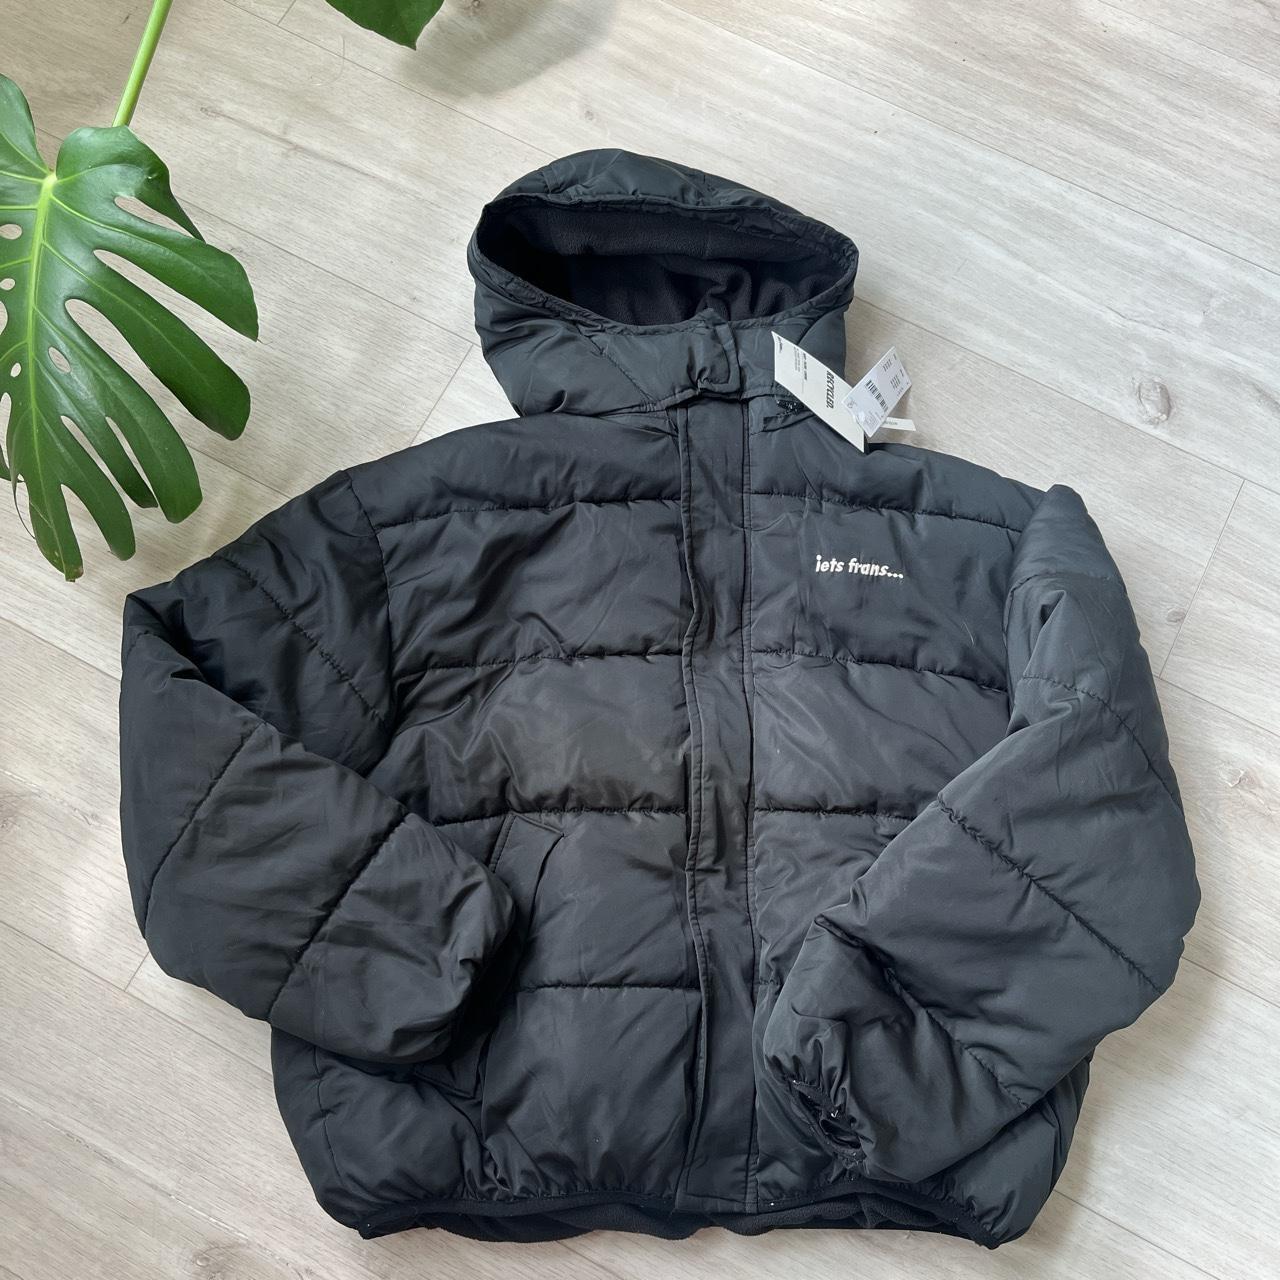 Urban Outfitters iets frans Black Puffer Coat... - Depop